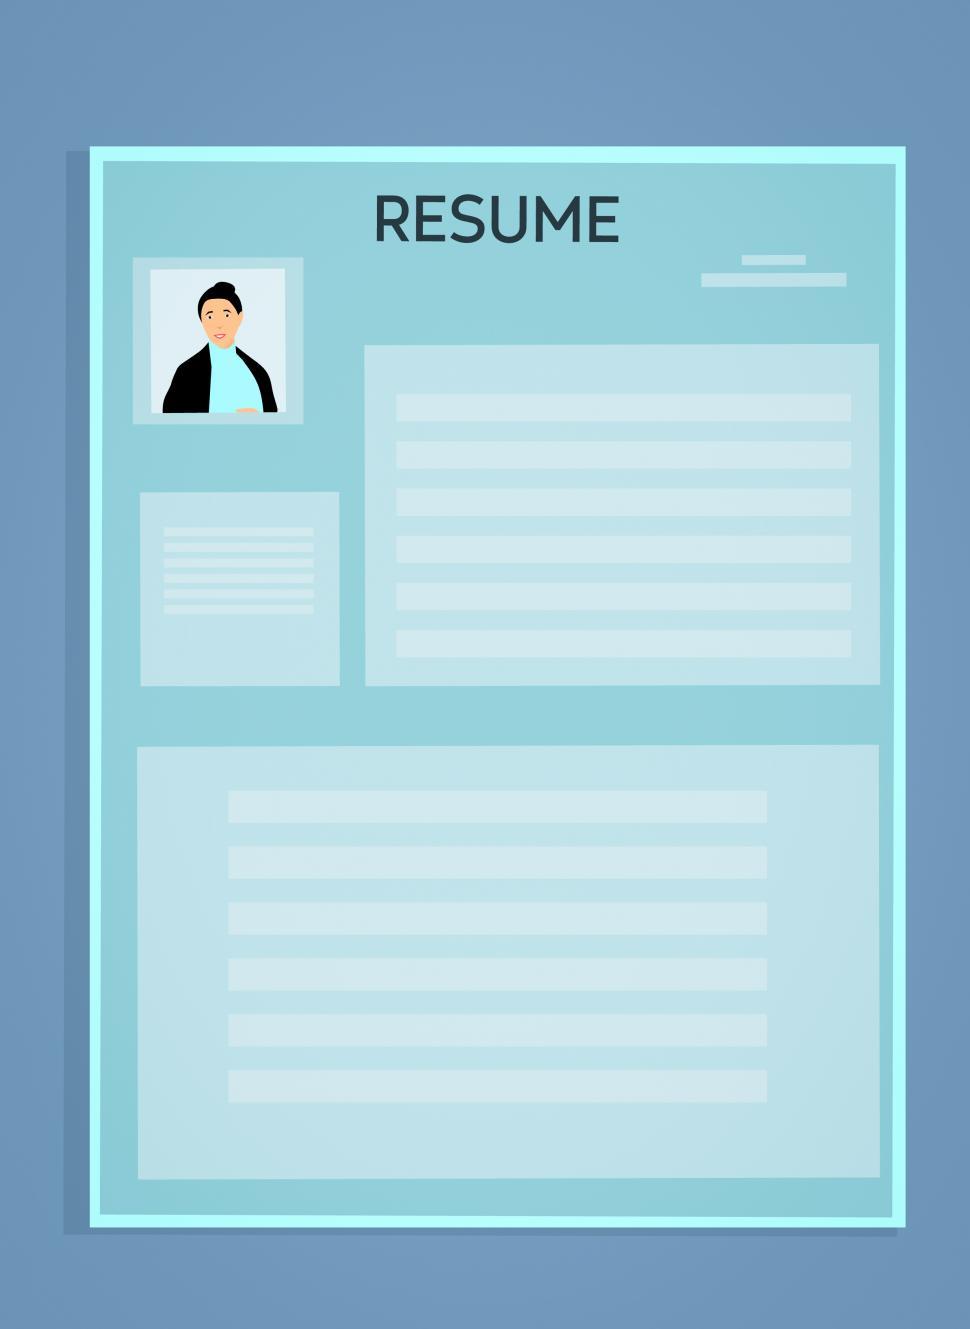 Free Image of resume template  